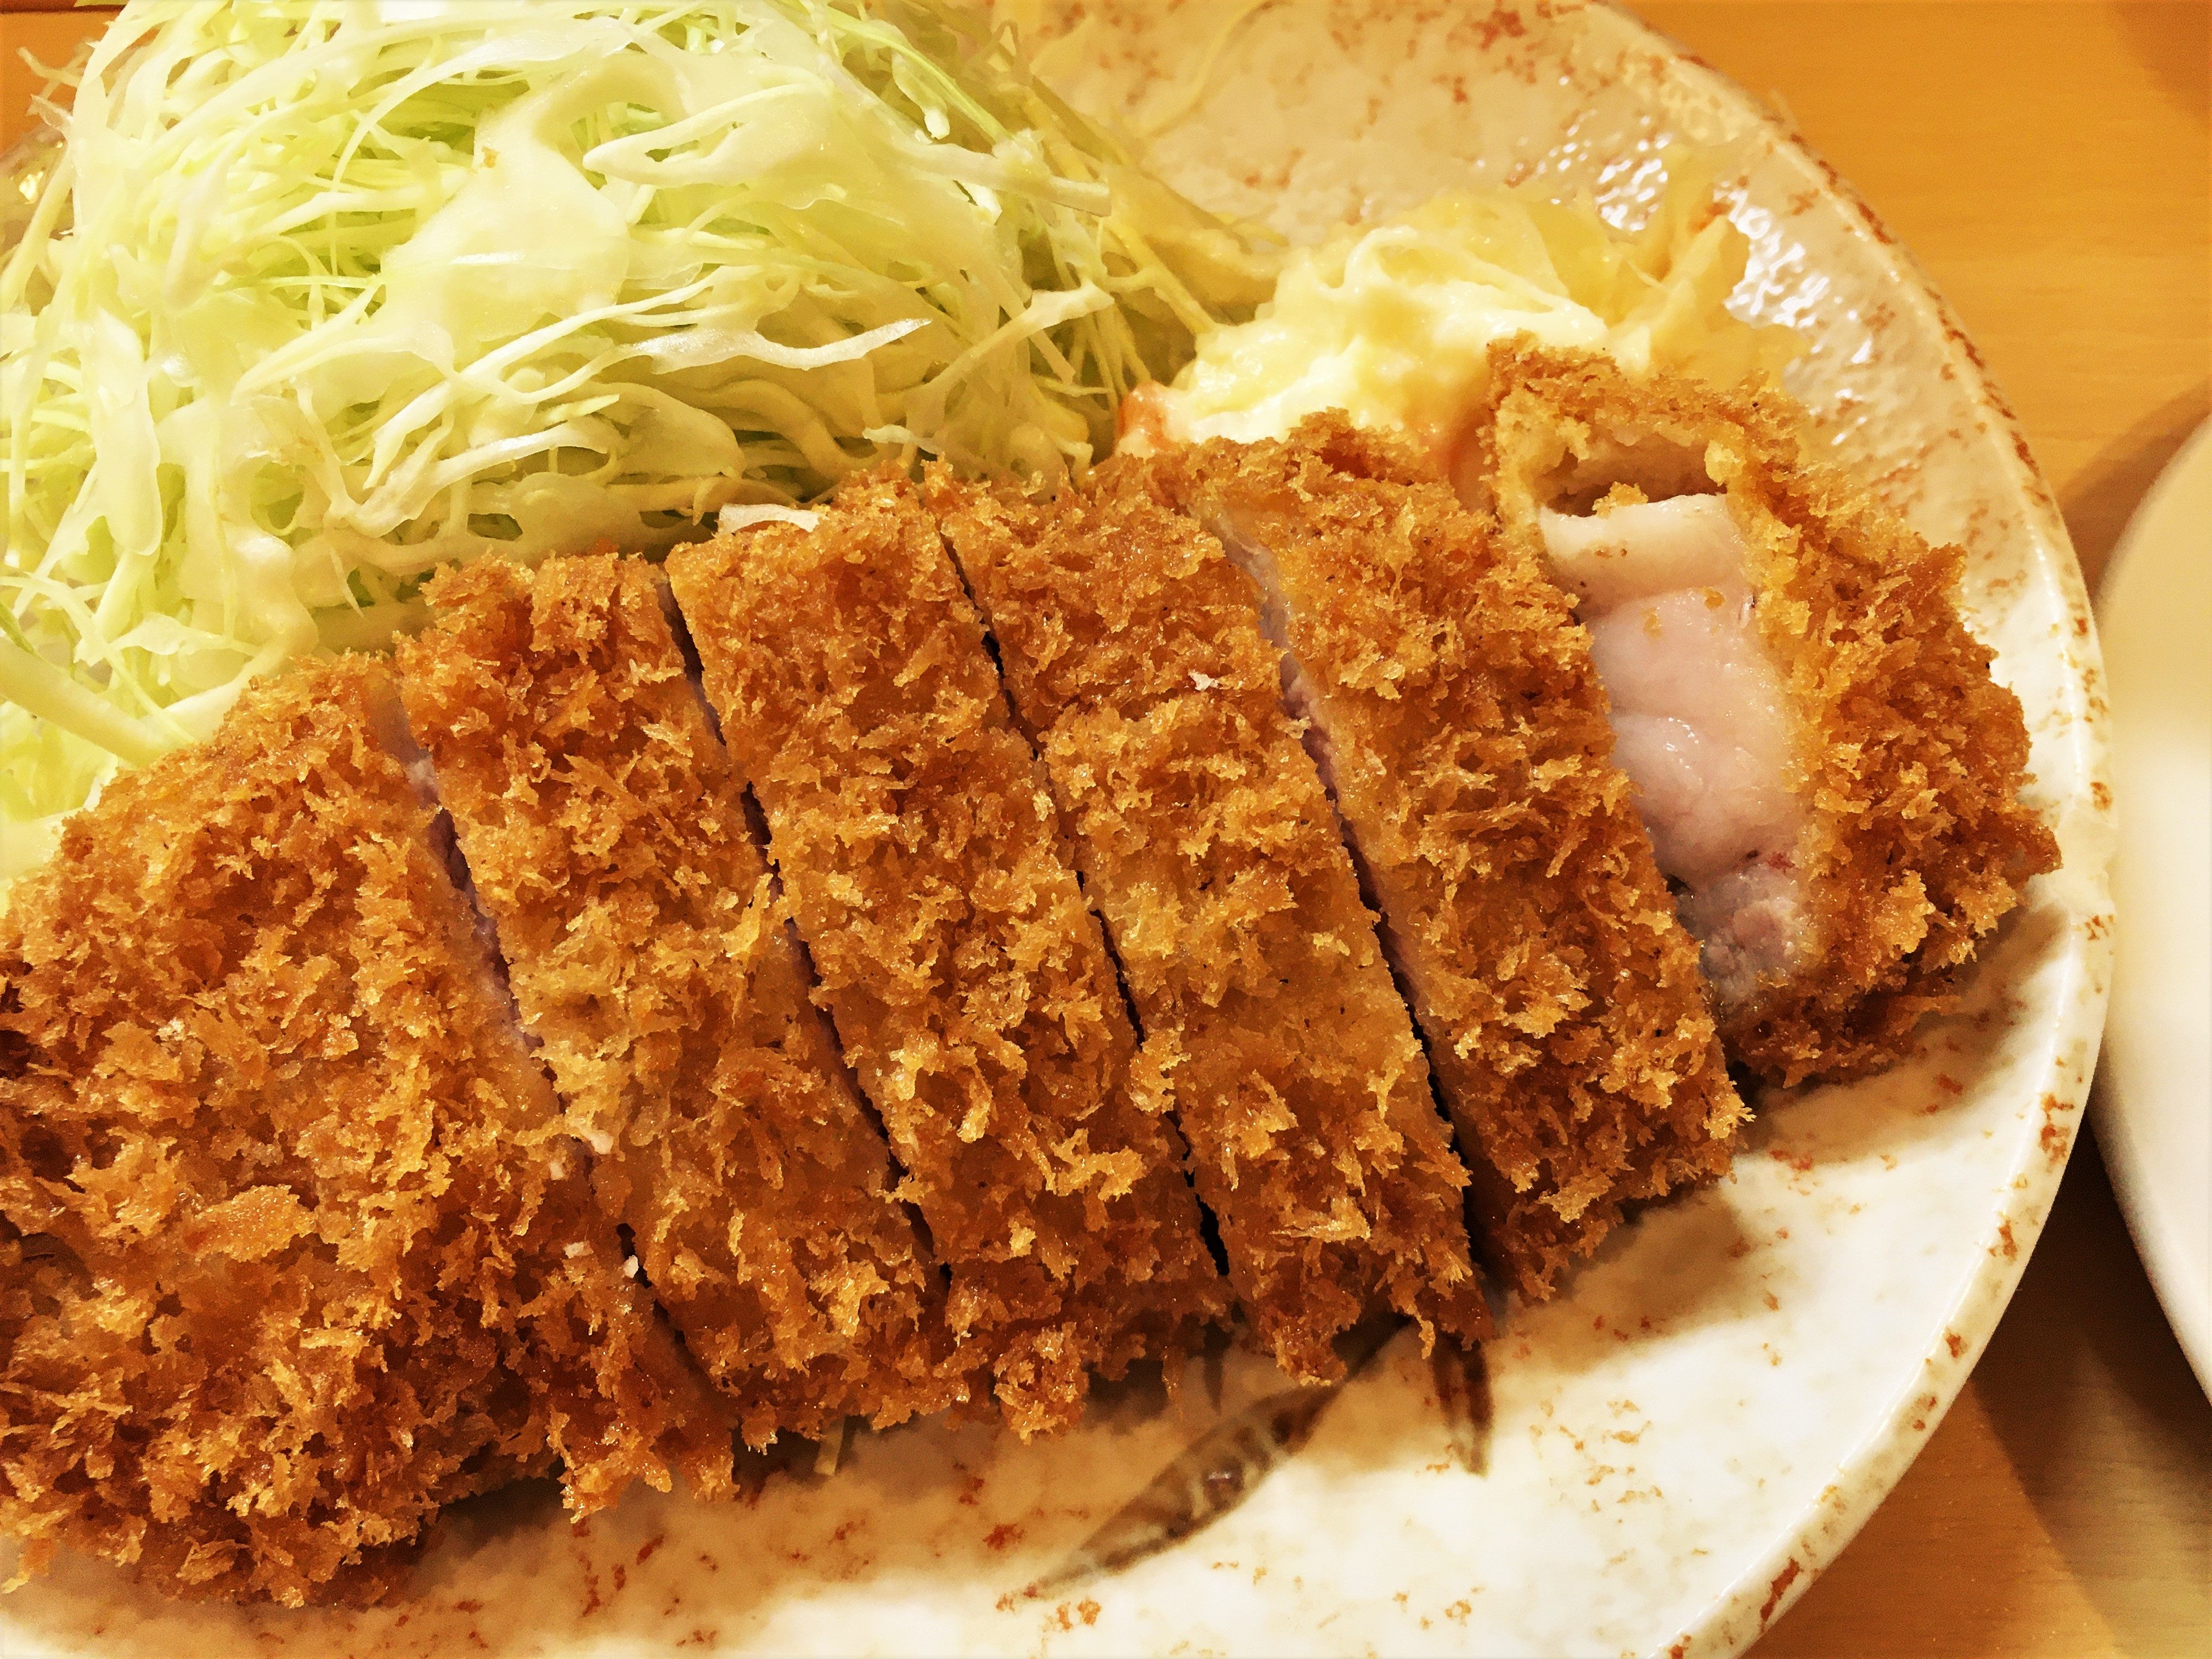 Tonkatsu is one of the most popular Japanese foods. But does this deep-fried pork cutlet, an adaptation from Western cuisine, count as washoku, or Japanese cuisine? Photo: Russell Thomas